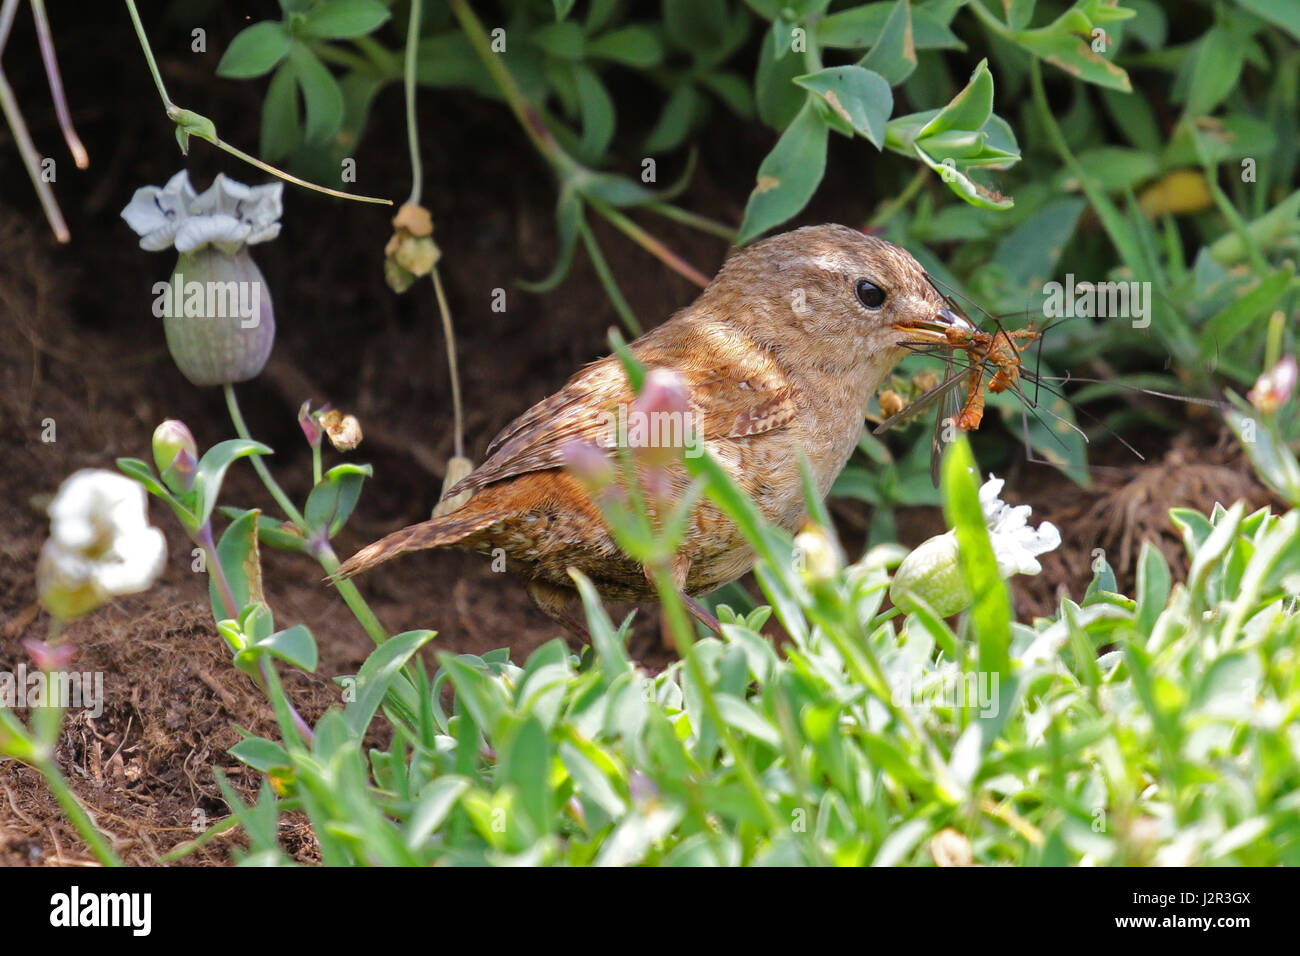 A wren with a beak full of insects for it's young Stock Photo